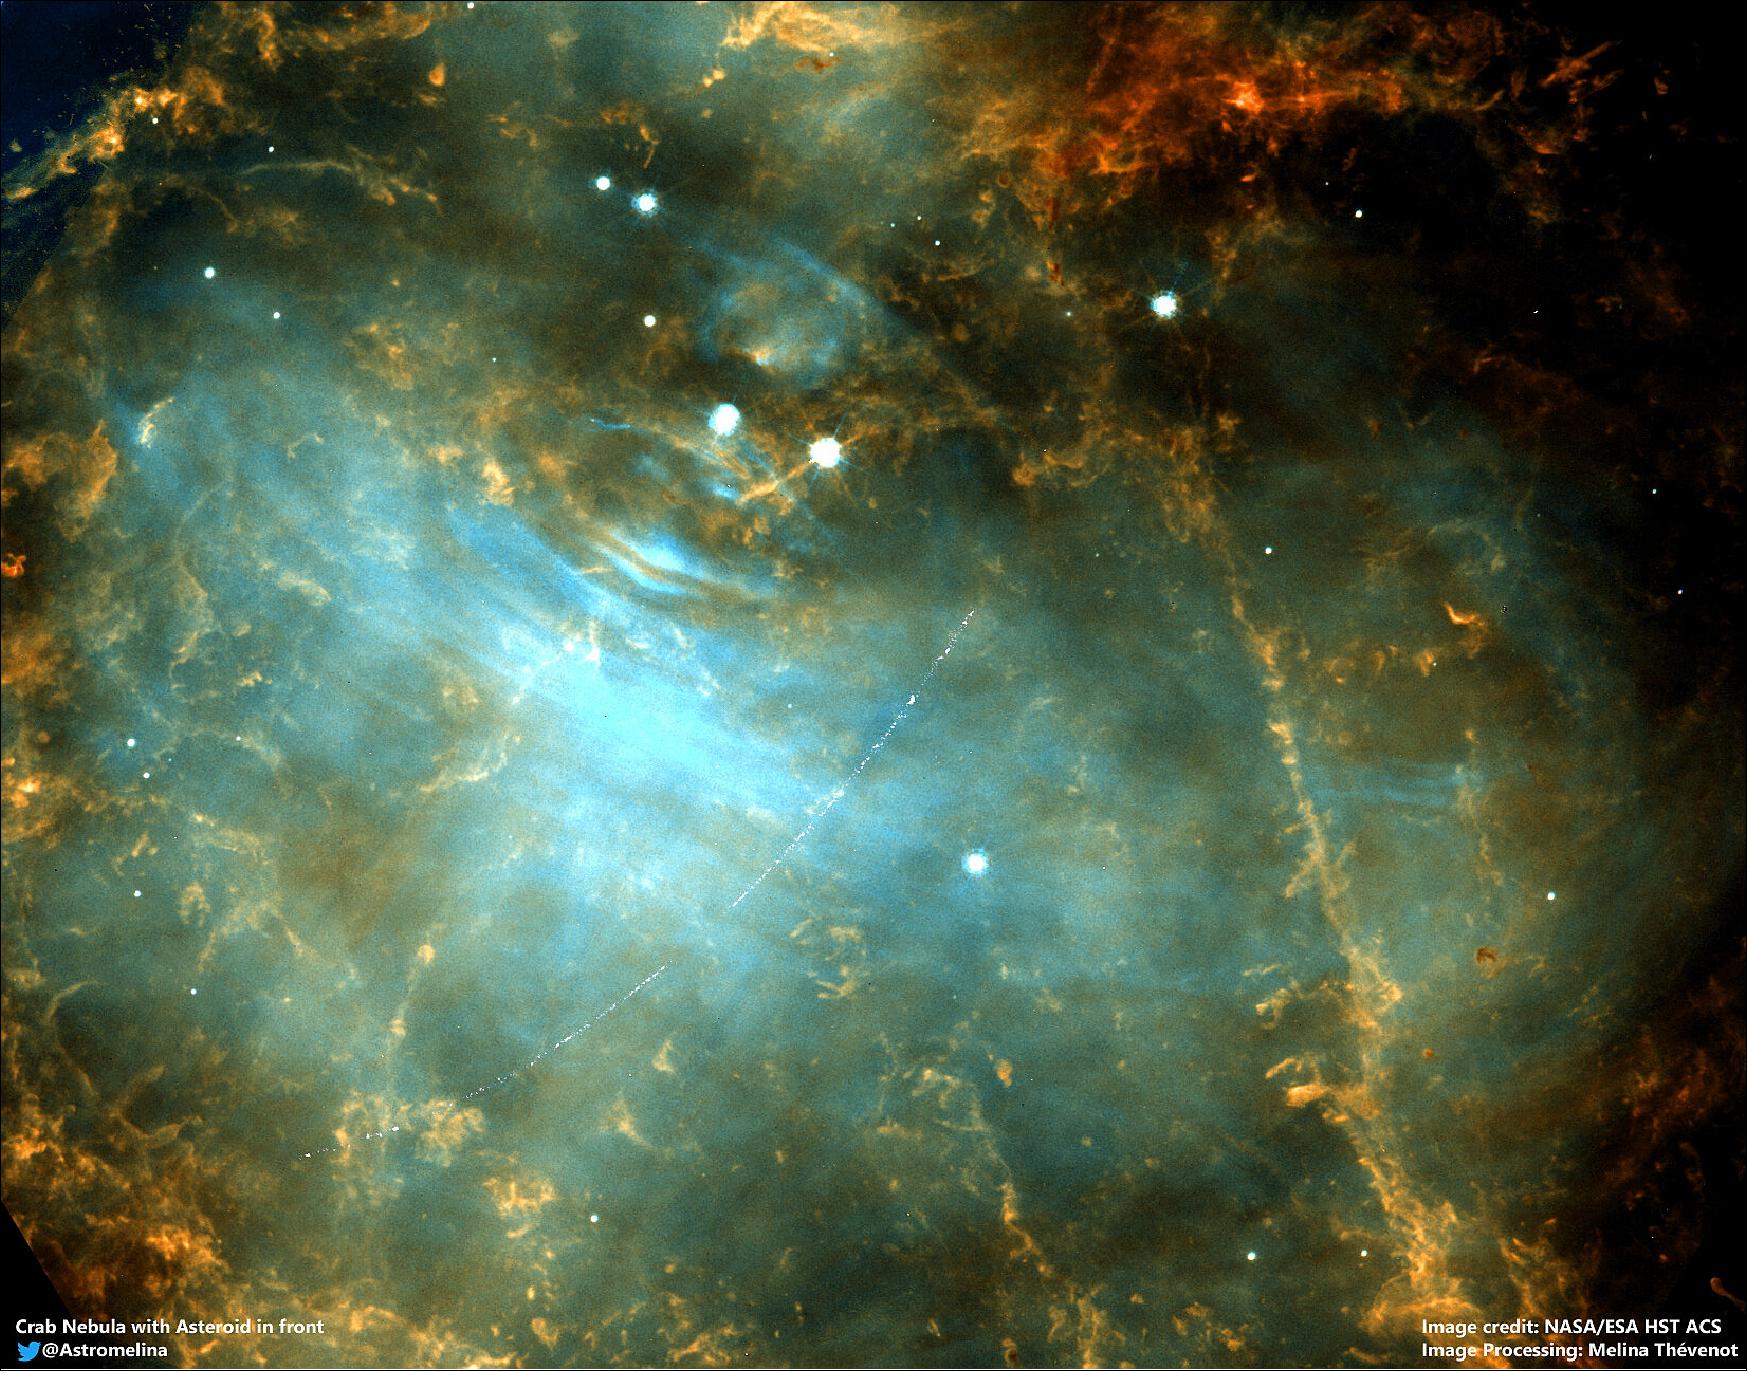 Figure 17: Foreground asteroid passing the Crab Nebula (image credit: ESA/Hubble & NASA, M. Thévenot (@AstroMelina); CC BY 4.0)